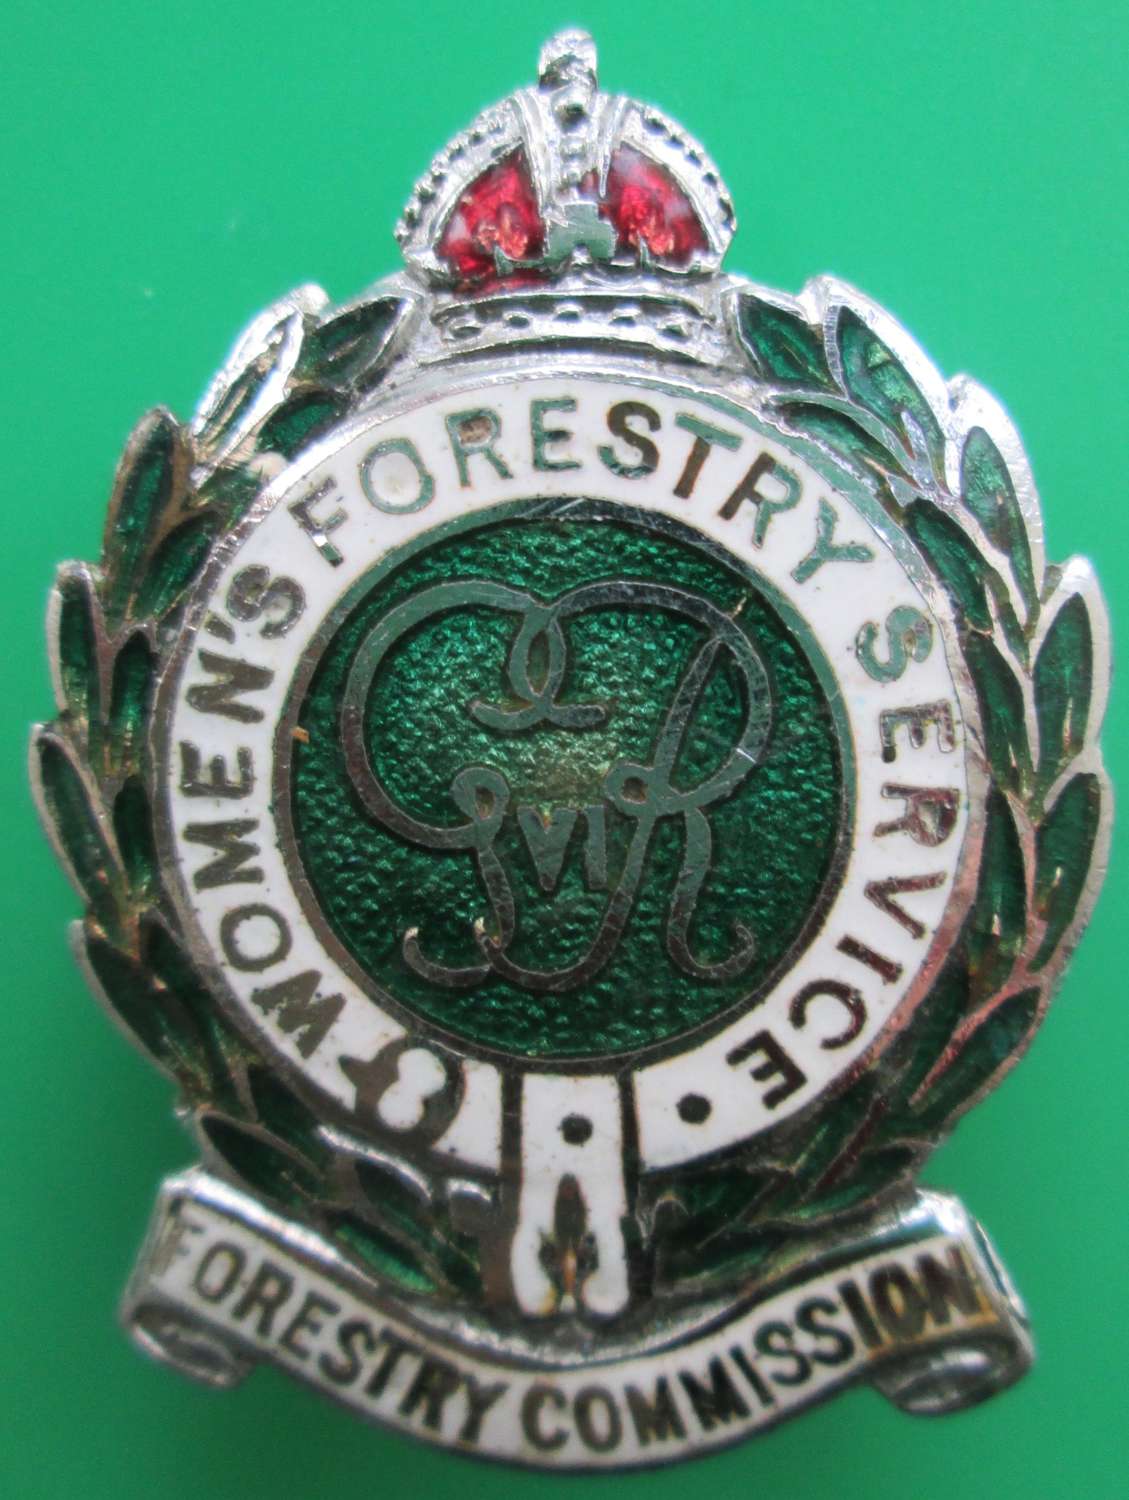 A WOMEN'S FORESTRY COMMISSION PIN BROOCH